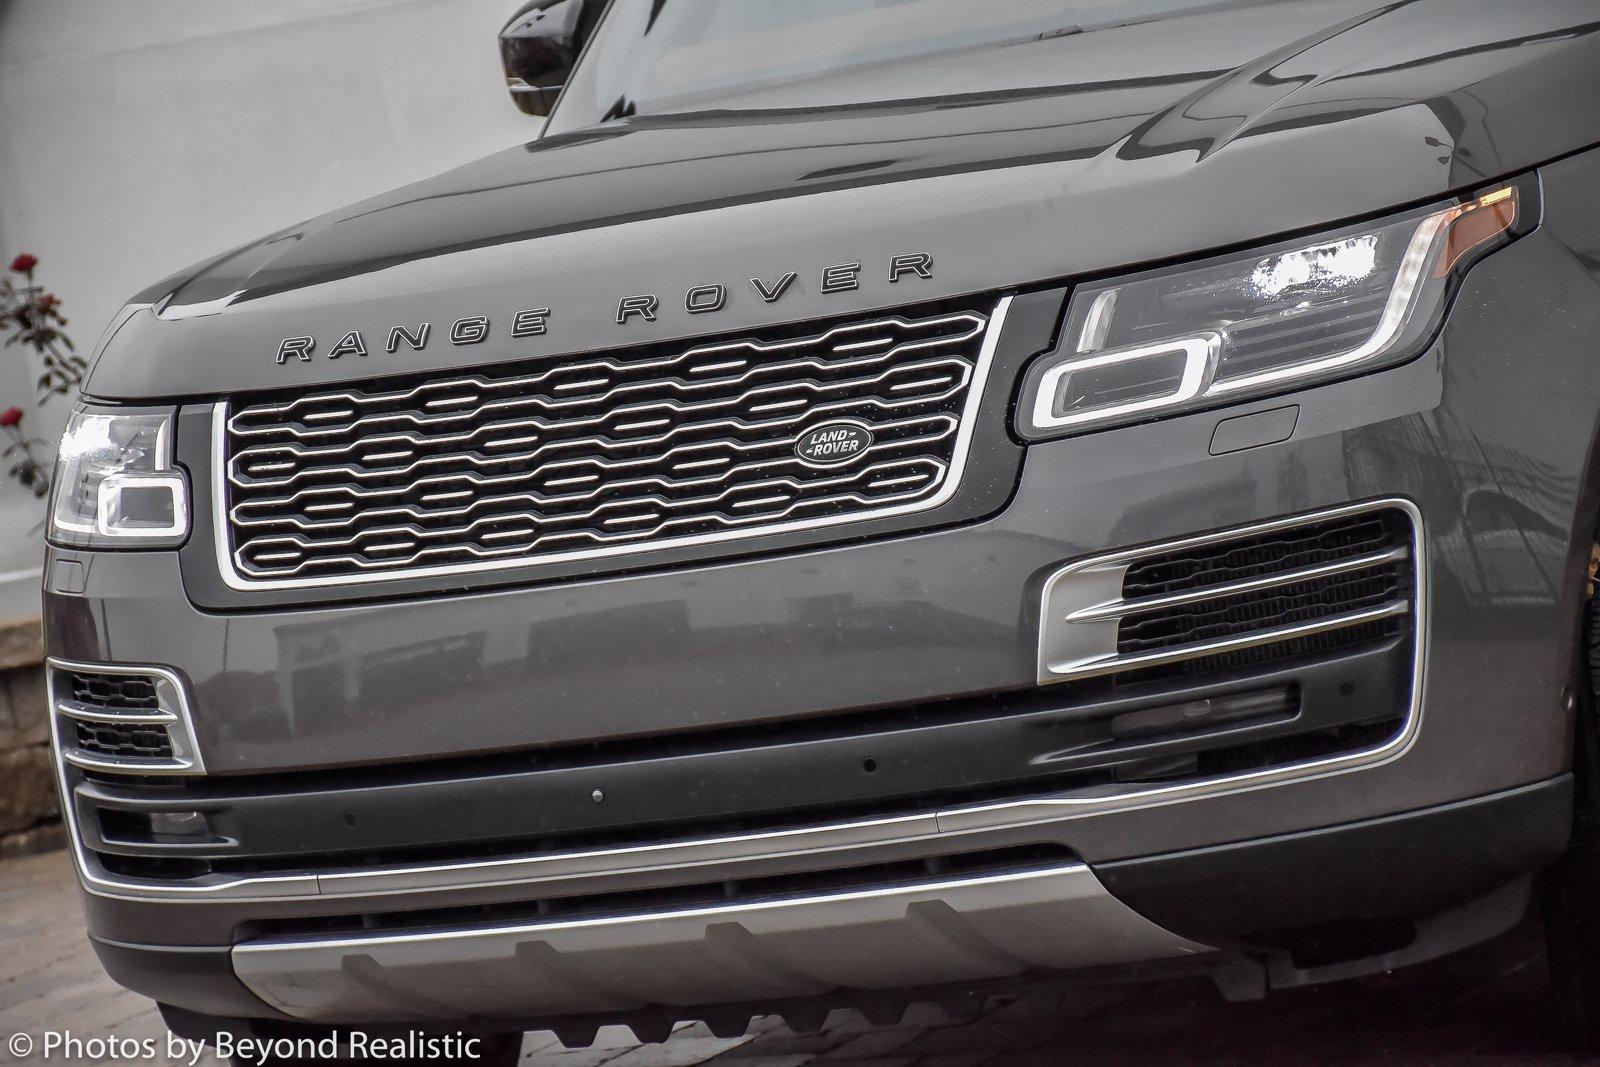 Used 2020 Land Rover Range Rover SV Autobiography, Rear Ent, | Downers Grove, IL